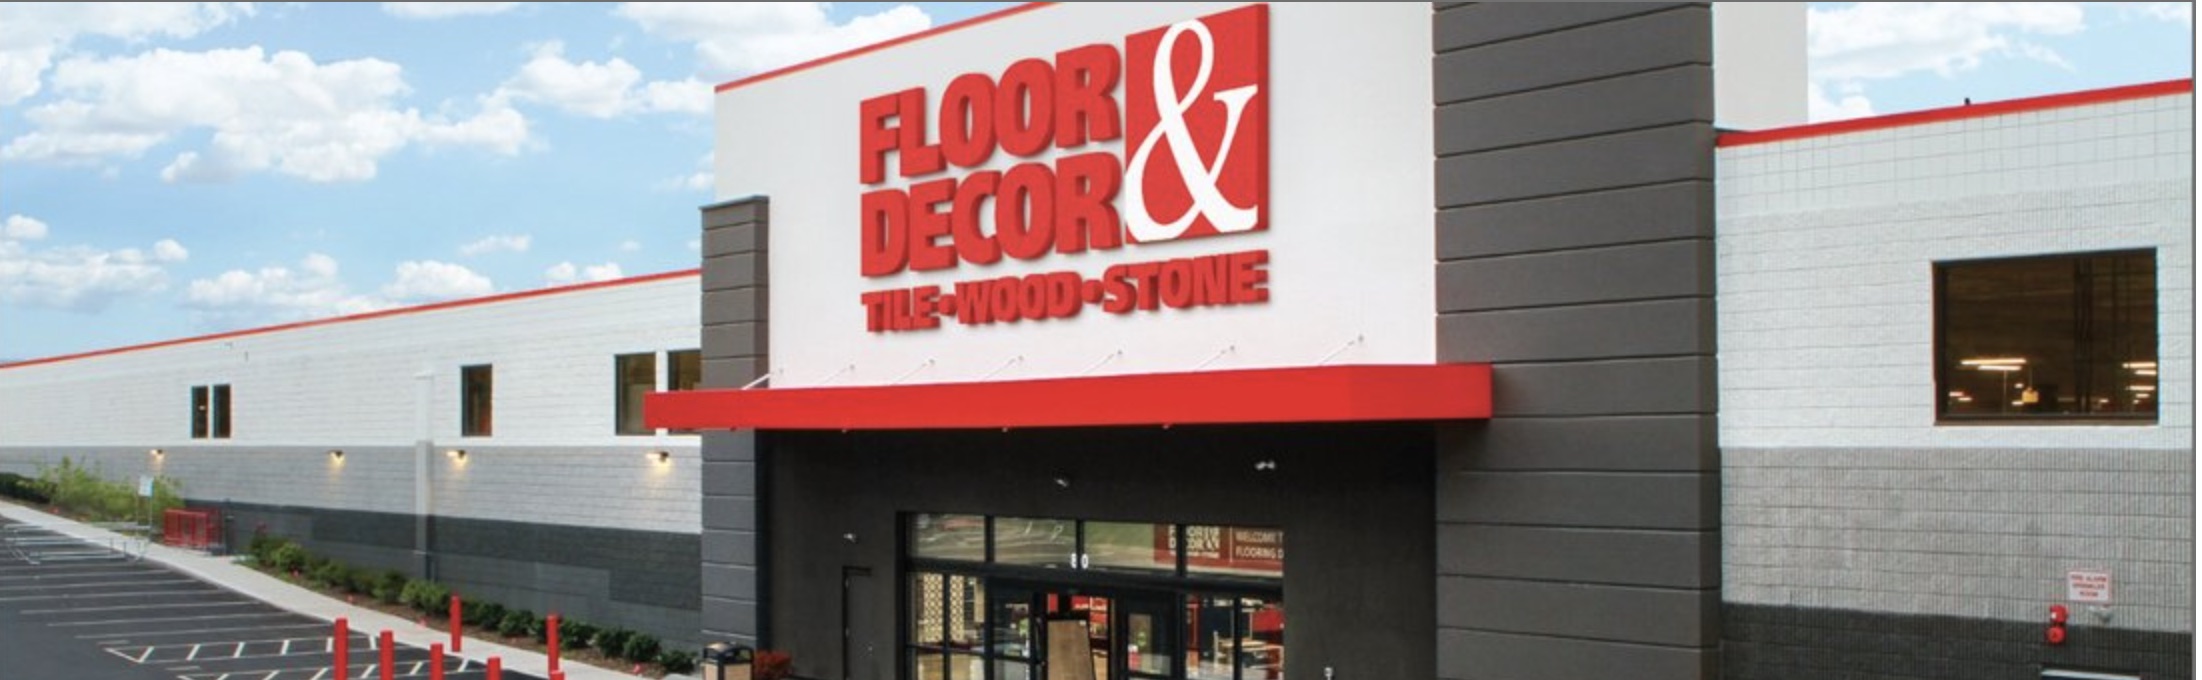 Floor & Decor to acquire Spartan Surfaces - Floor Covering News